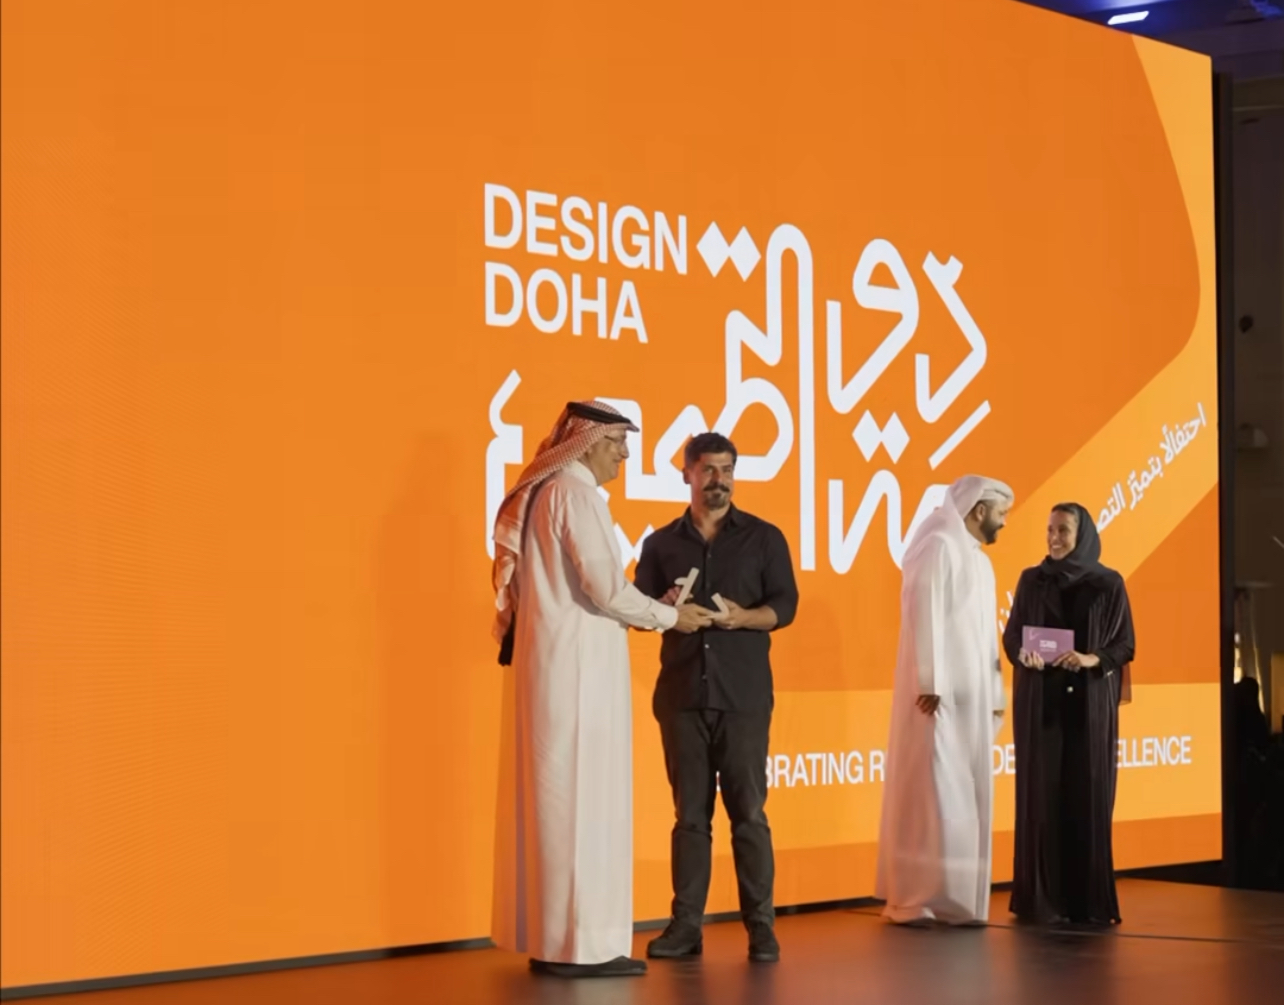 Who are the winners of the Design Doha Prize?